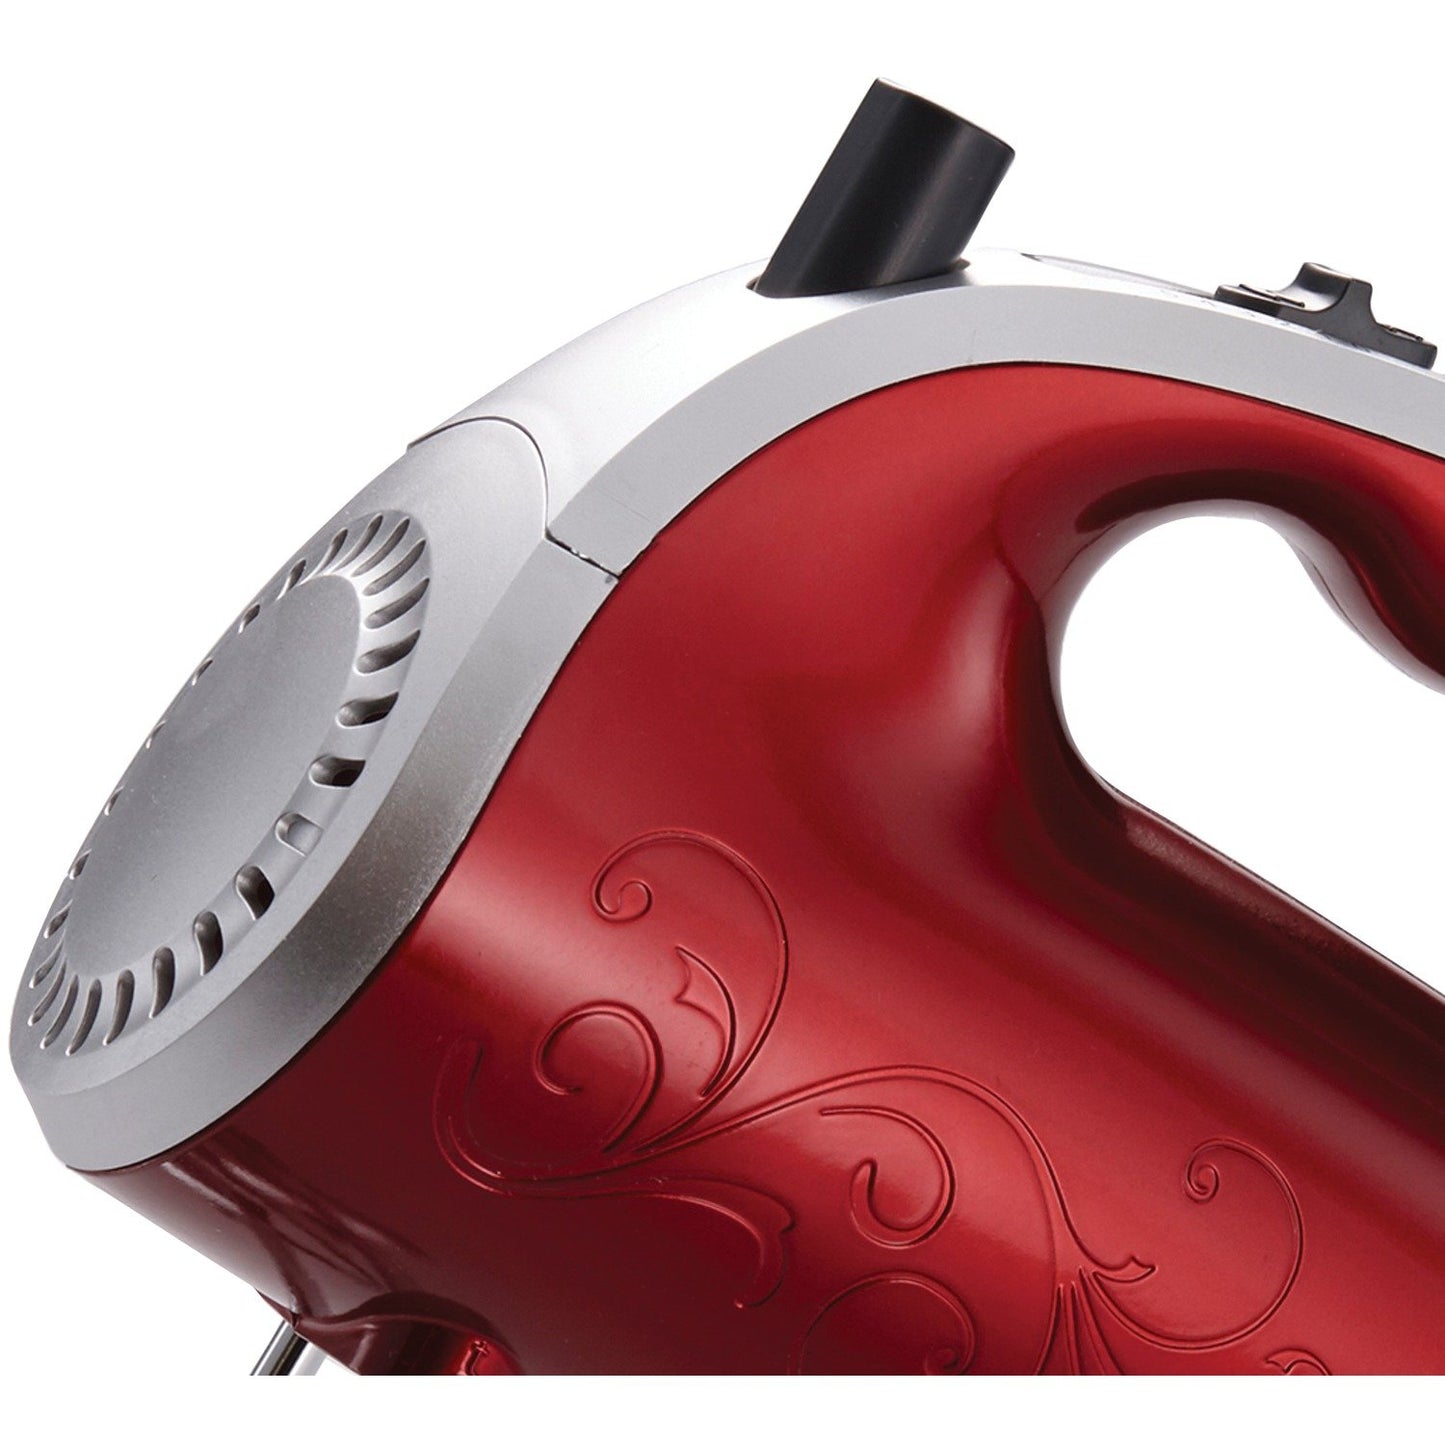 Brentwood Appl. HM-48R Lightweight 5-Speed Electric Hand Mixer (Red)